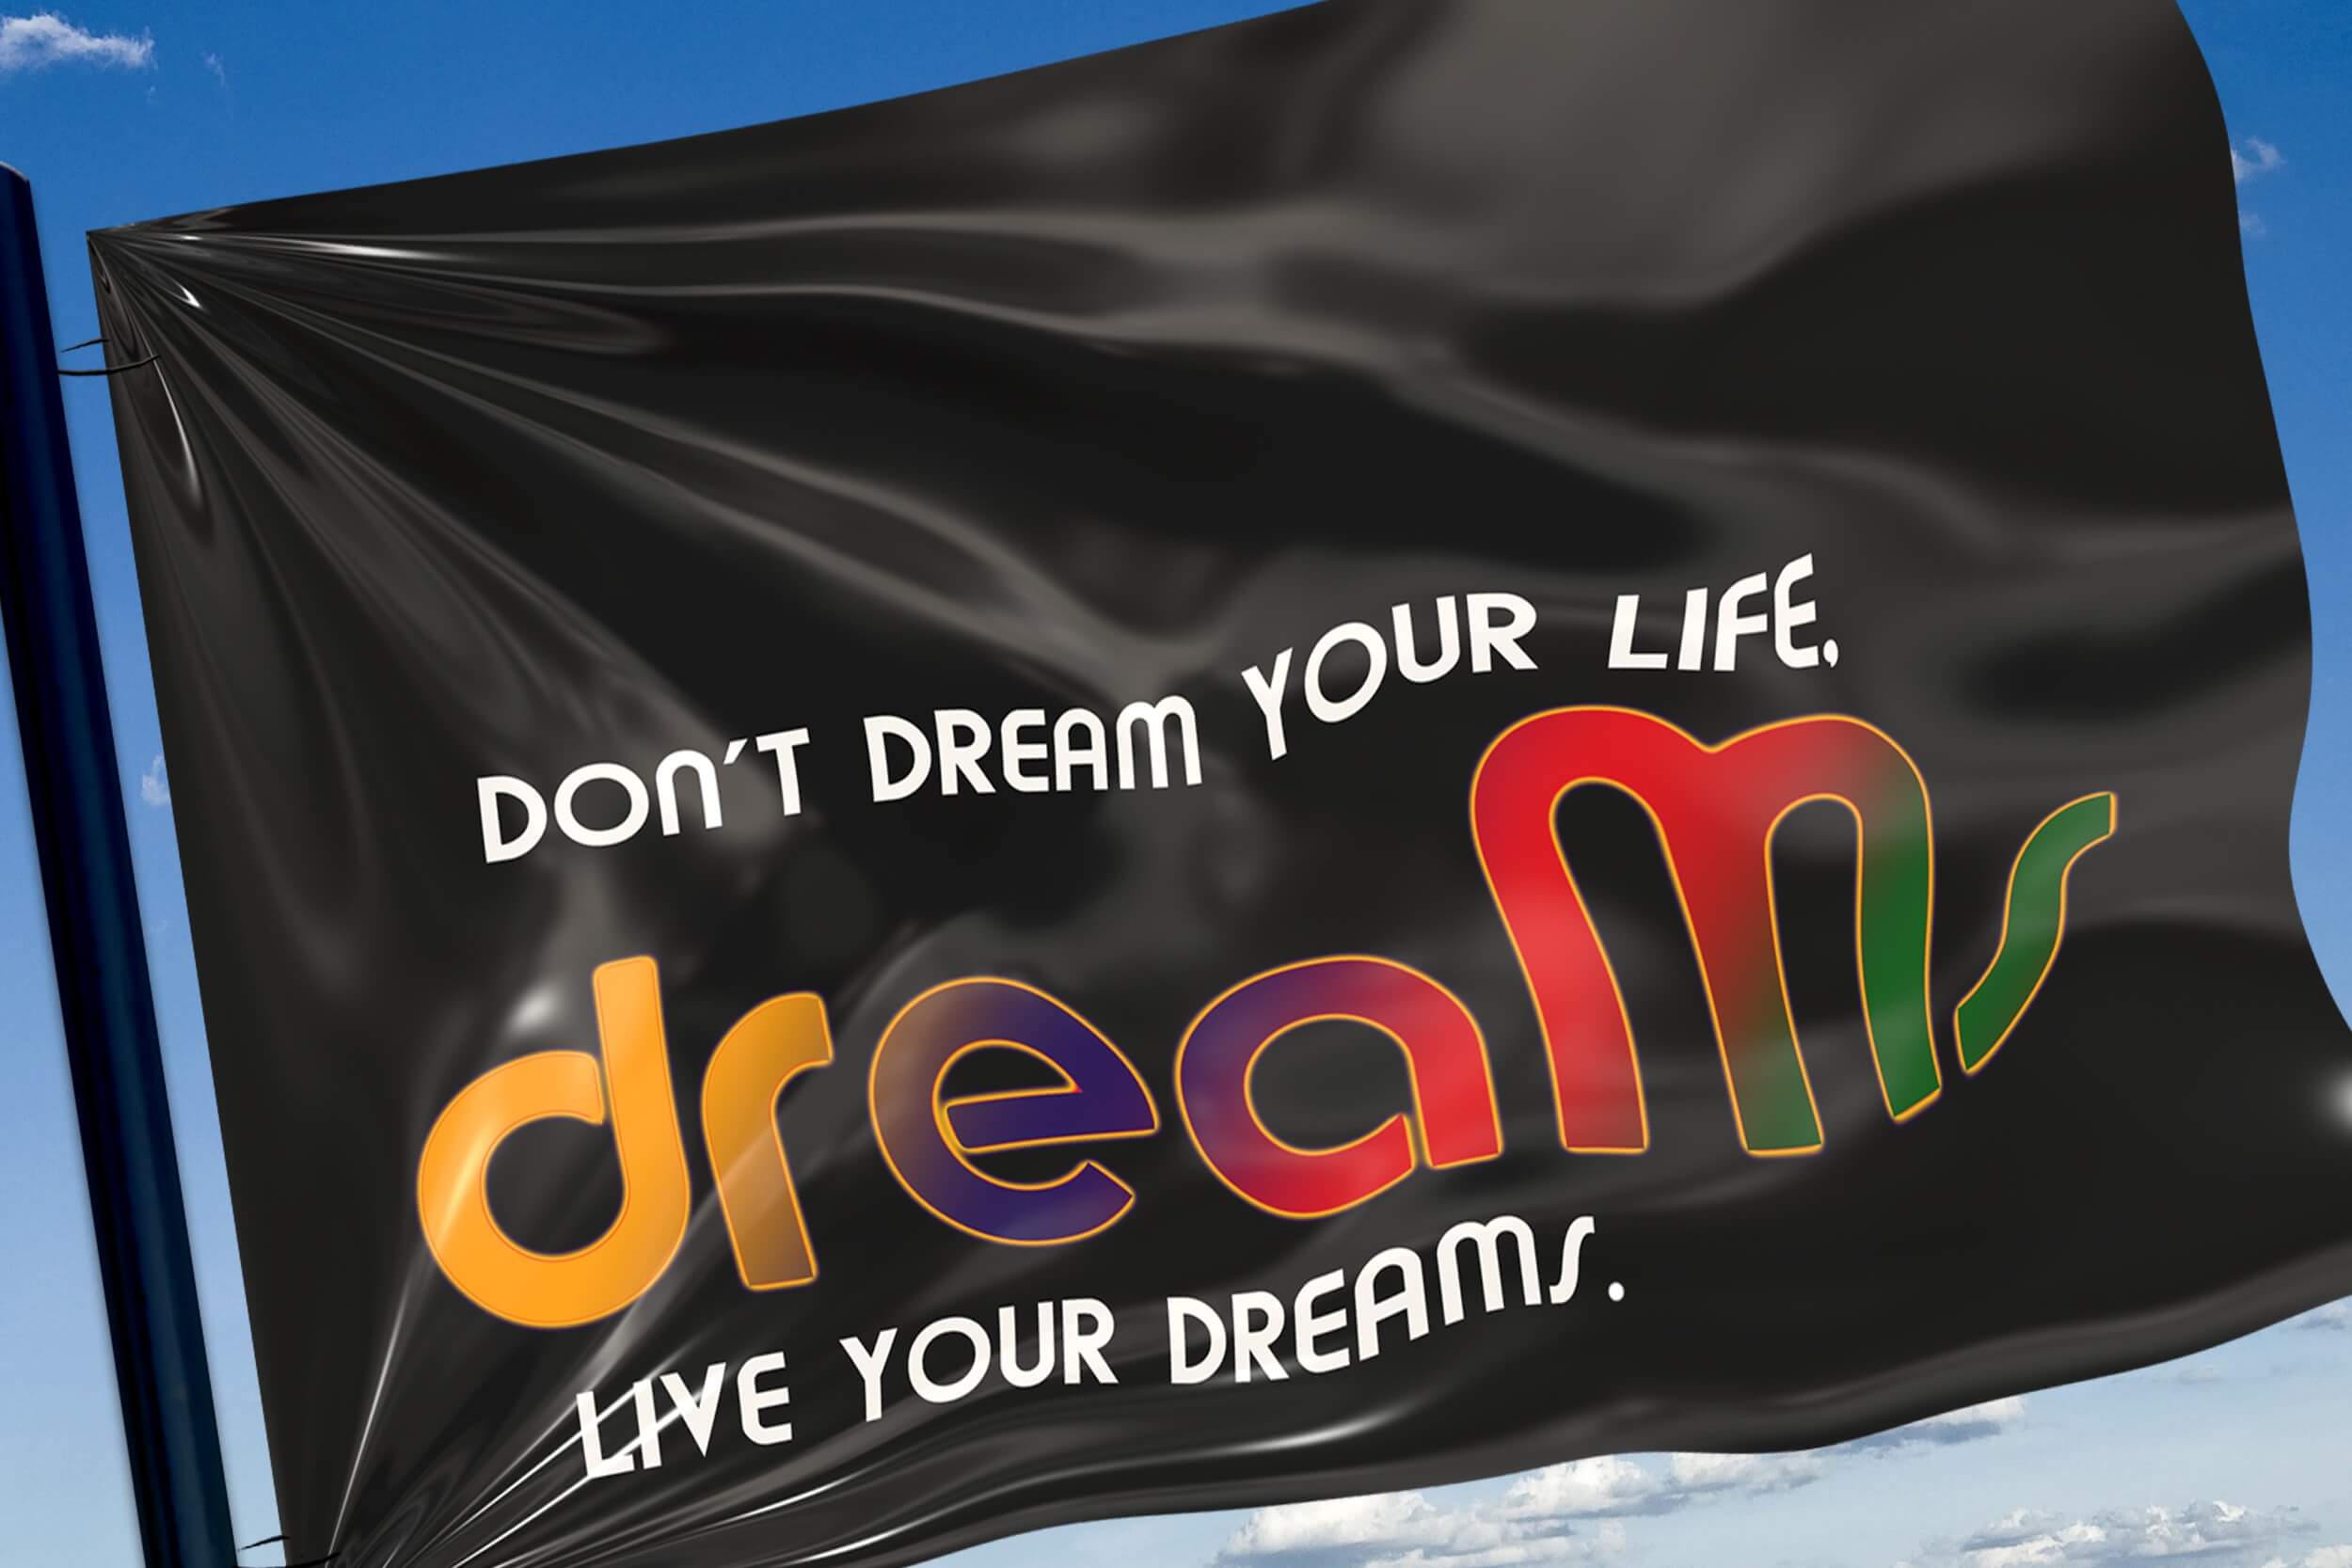 Don't dream your life, live your dreams.